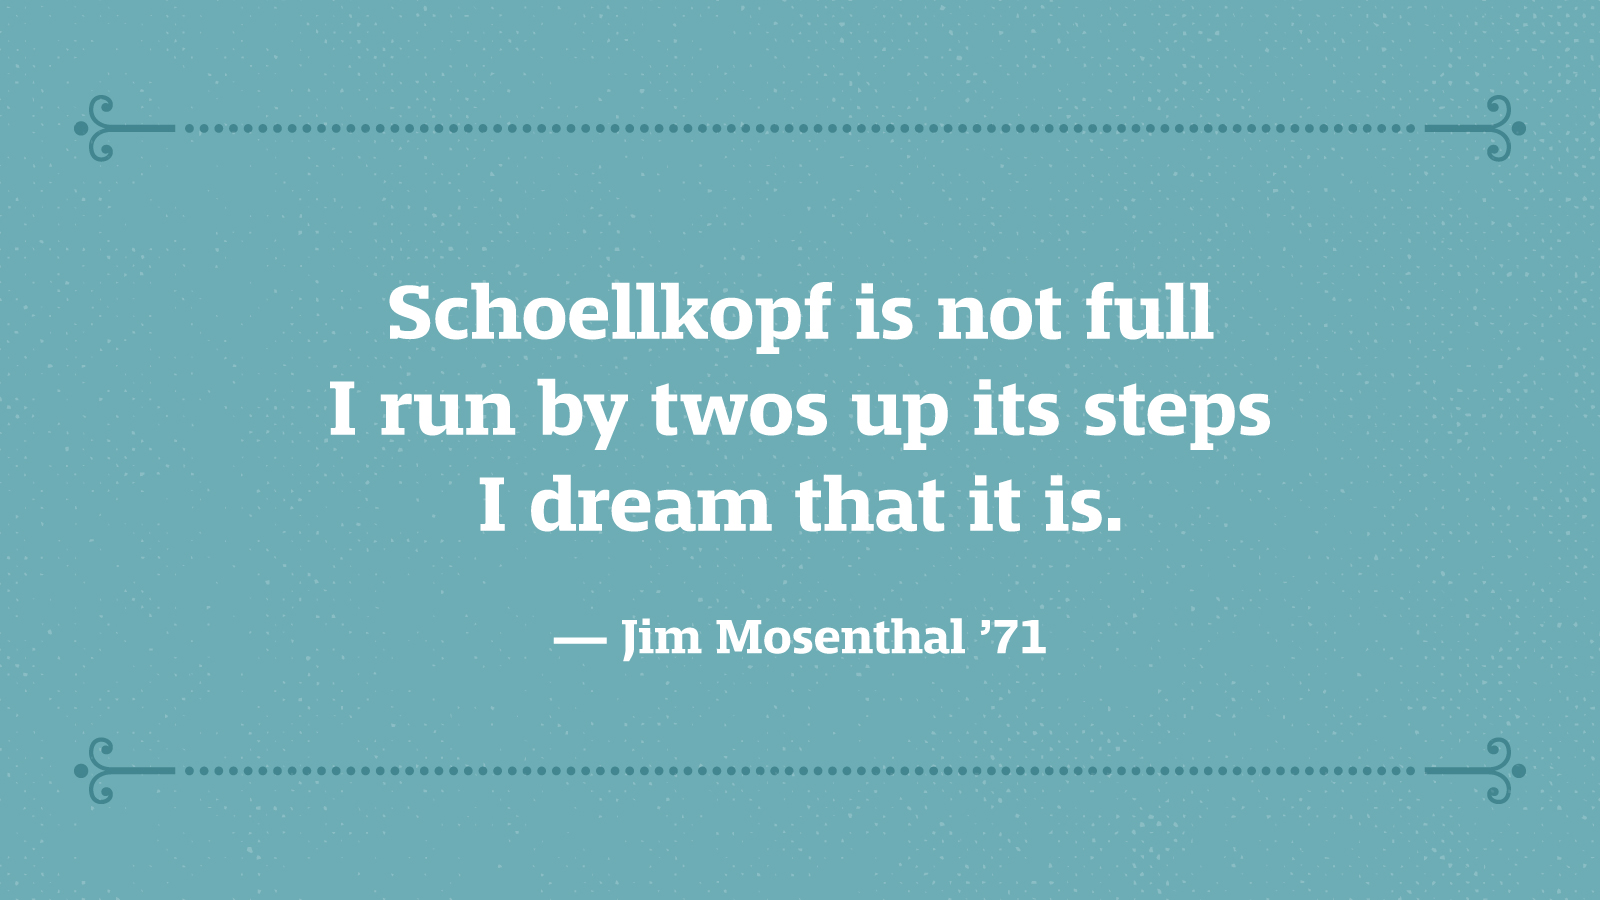 Schoellkopf is not full I run by twos up its steps I dream that it is. — Jim Mosenthal ’71